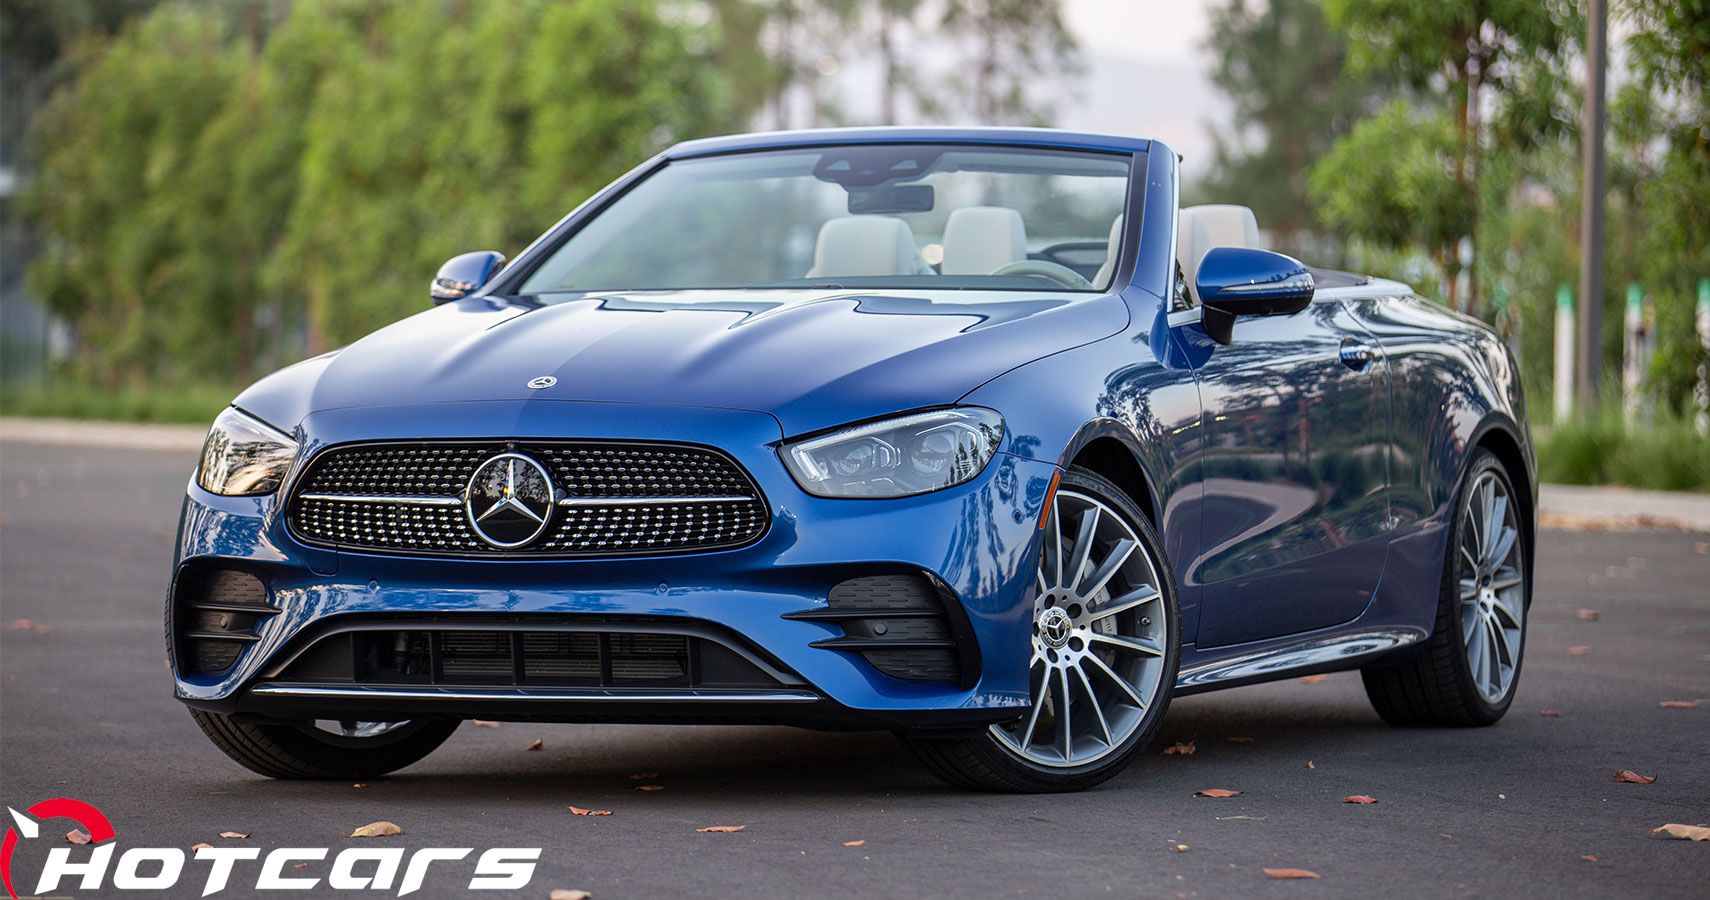 2022 Mercedes E450 4MATIC Cabriolet Review The Luxury Convertible